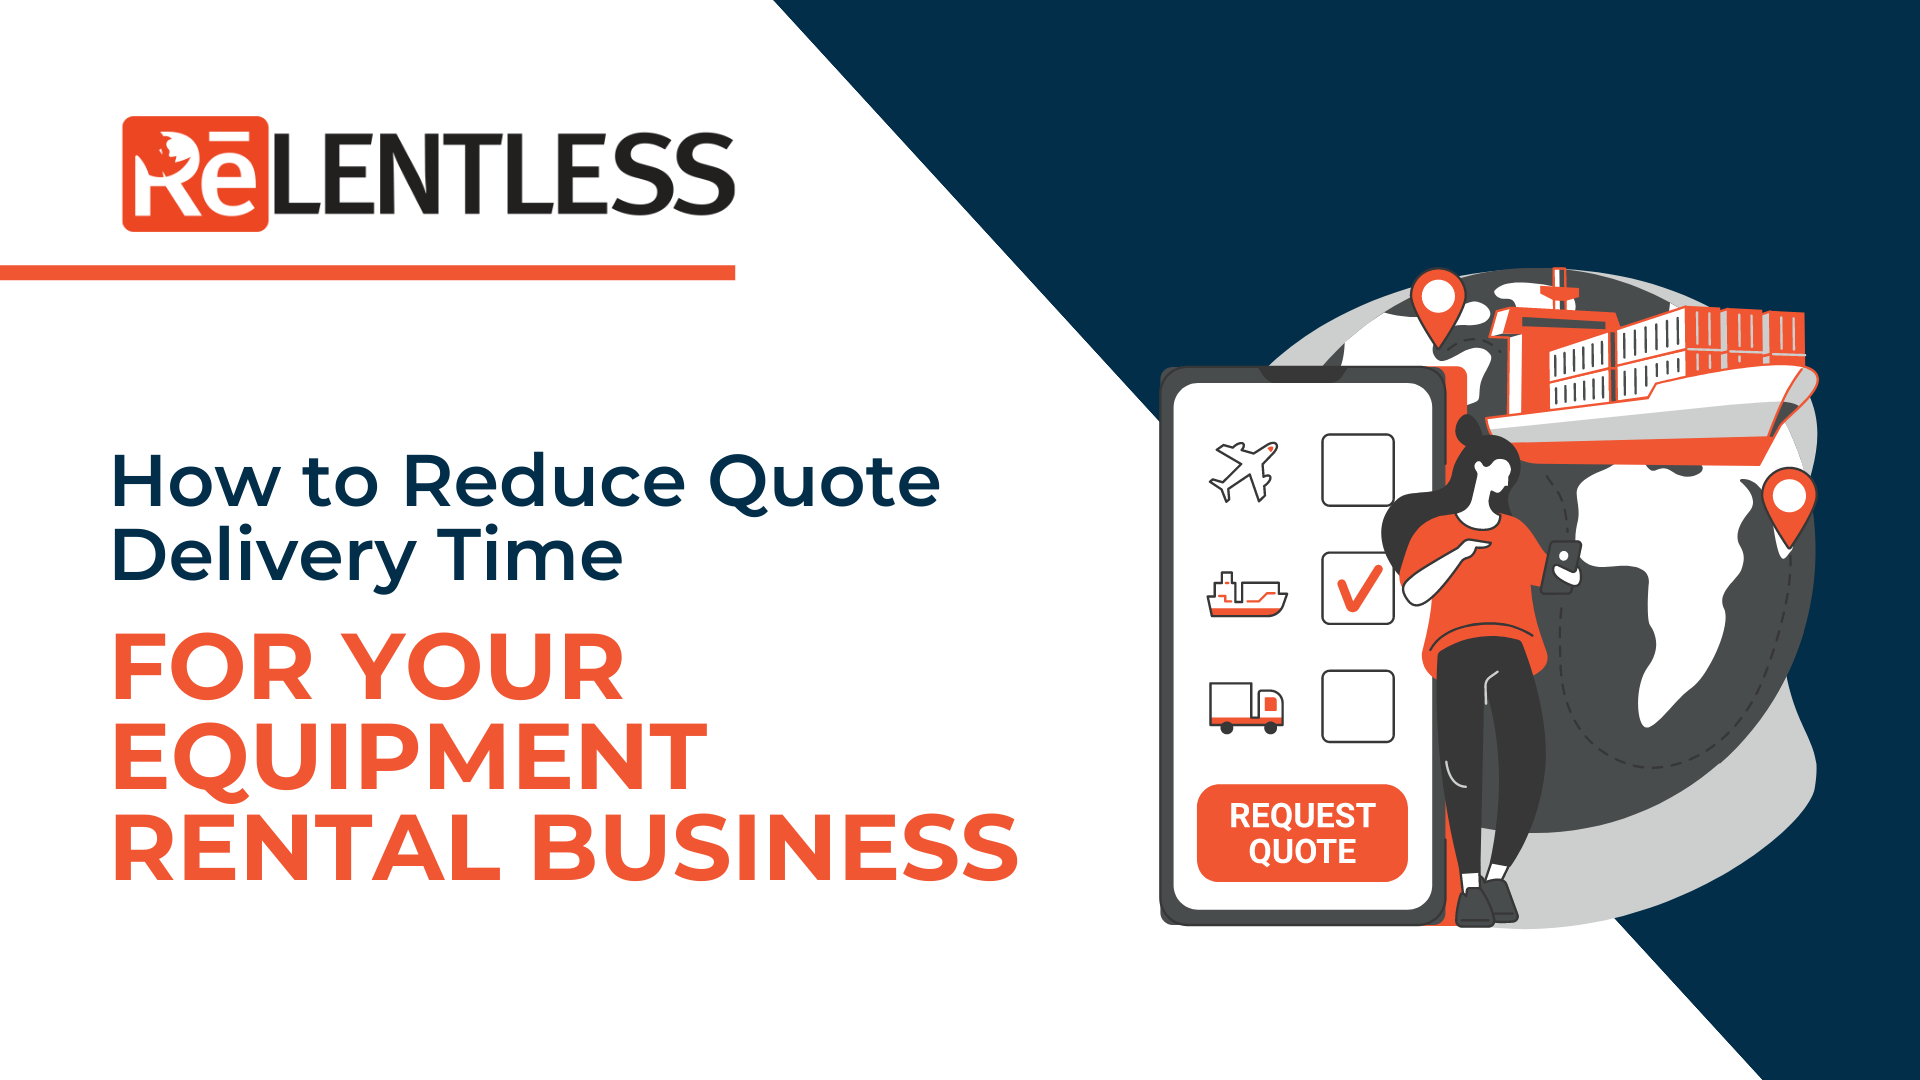 How to Reduce Quote Delivery Time for Your Equipment Rental Business